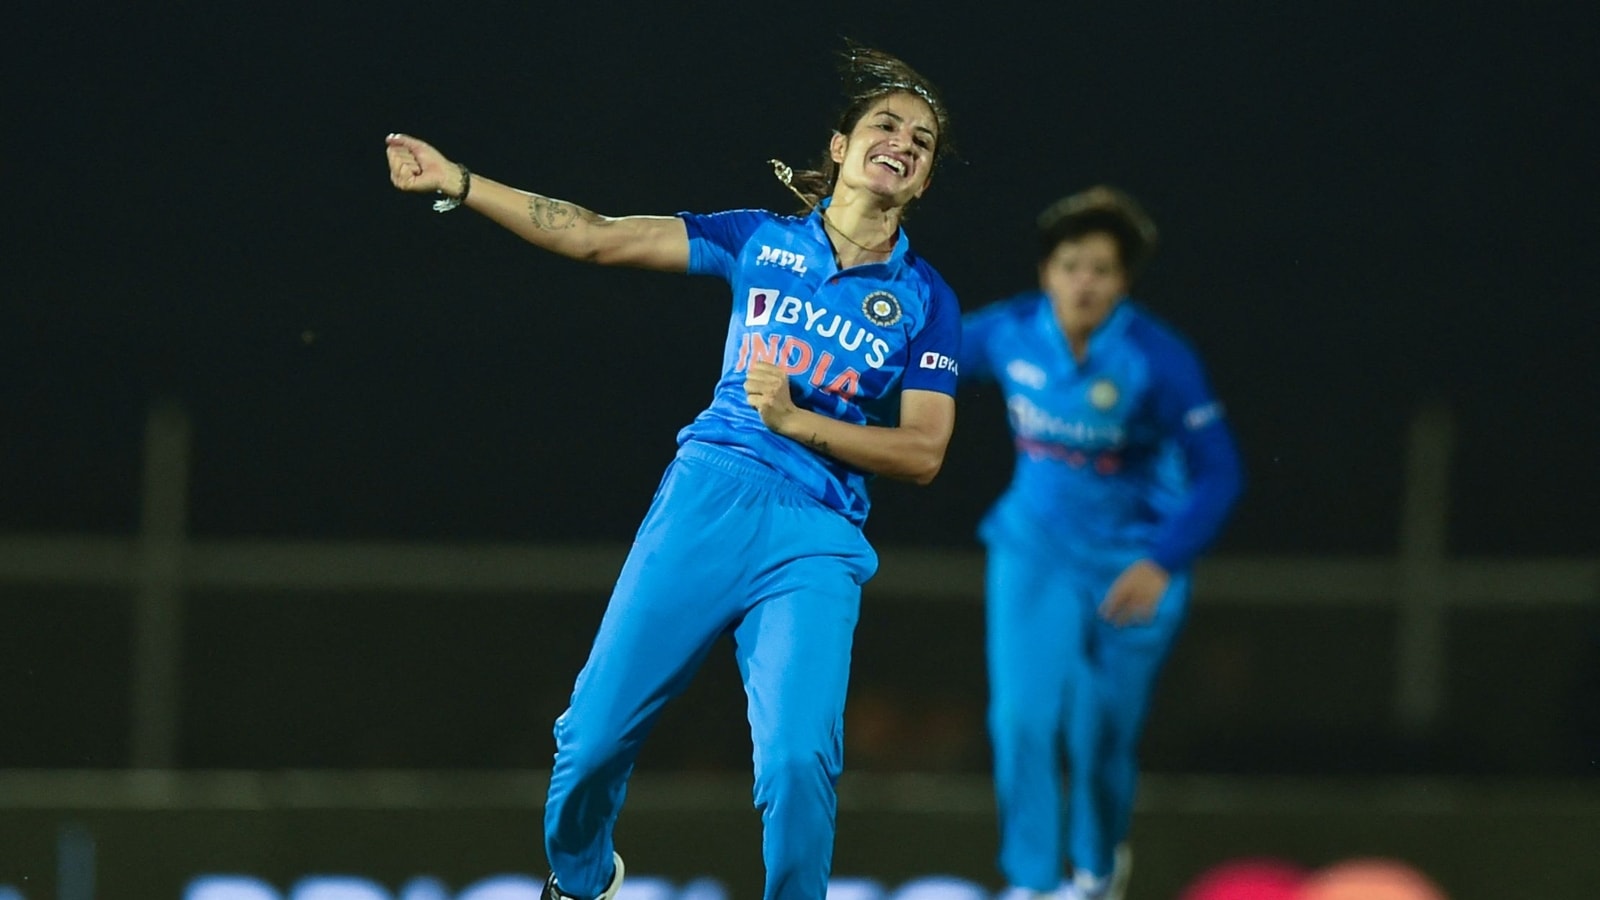 Indias Renuka Singh Named Icc Emerging Womens Cricketer Of The Year 